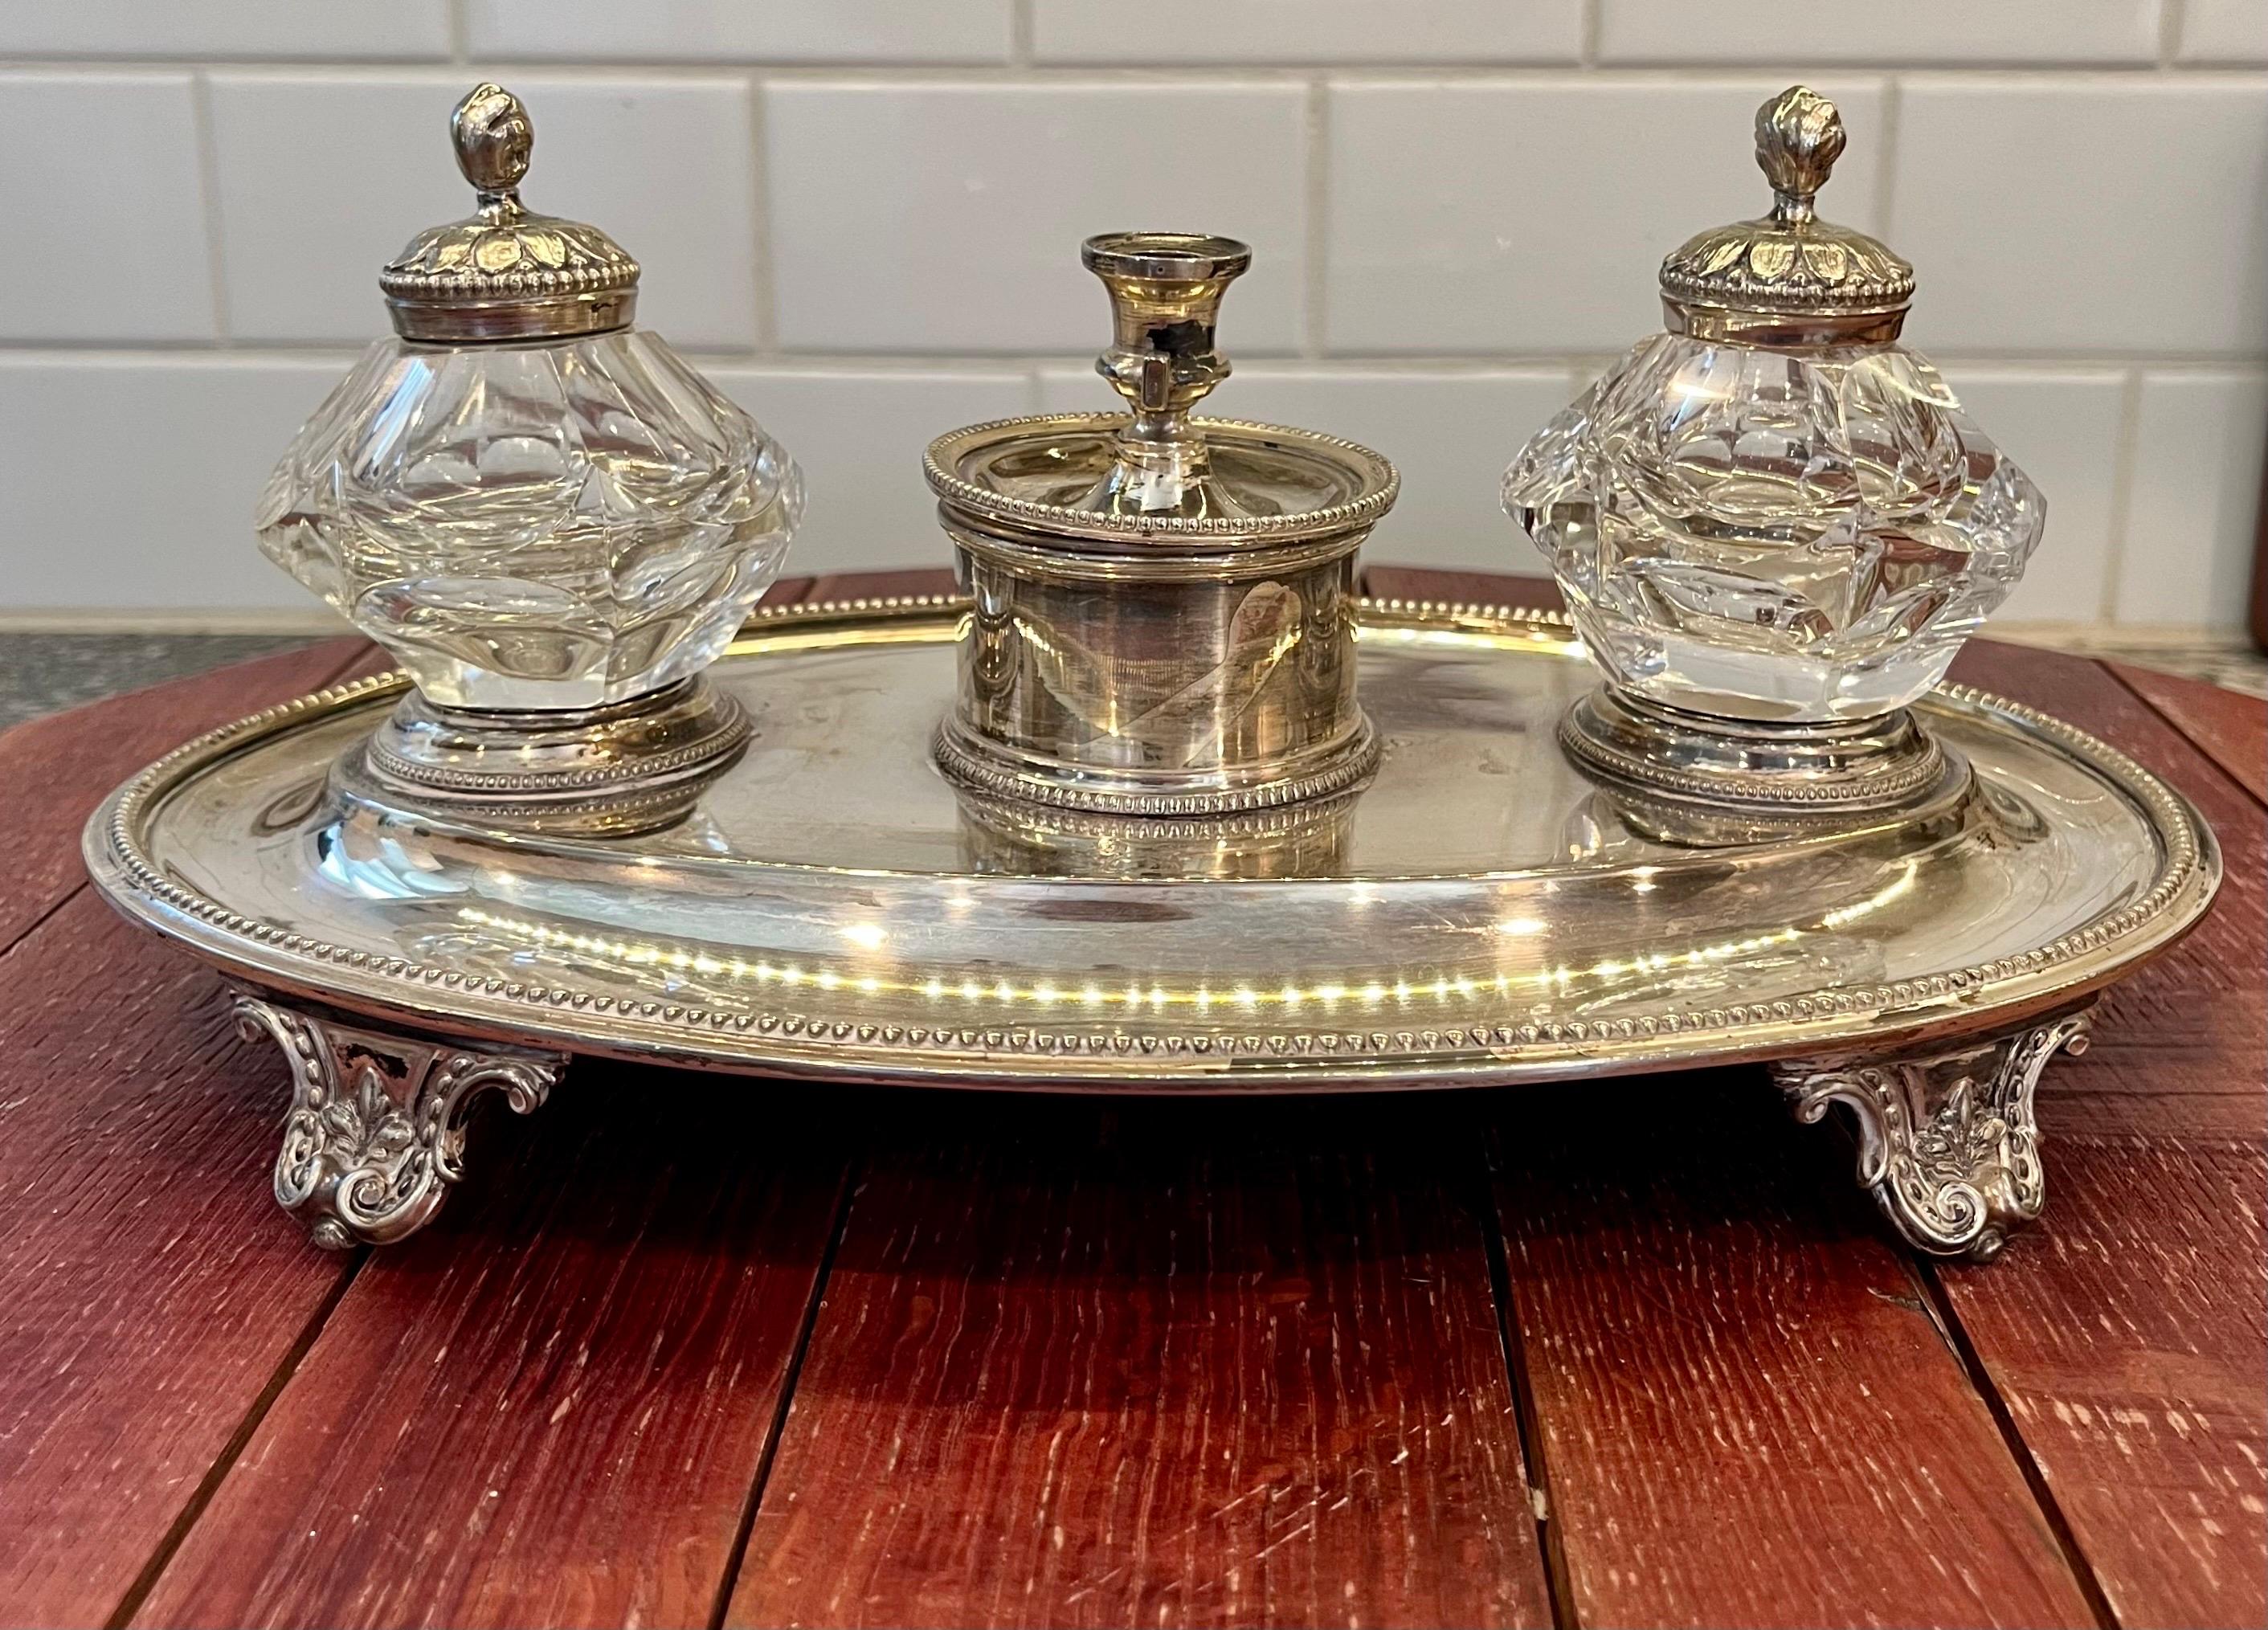 Stunning ink stand in Georgian style. Silver Plate and Crystal or cut glass ink wells. Candle holder to light the way. Stamped with makers marks. 